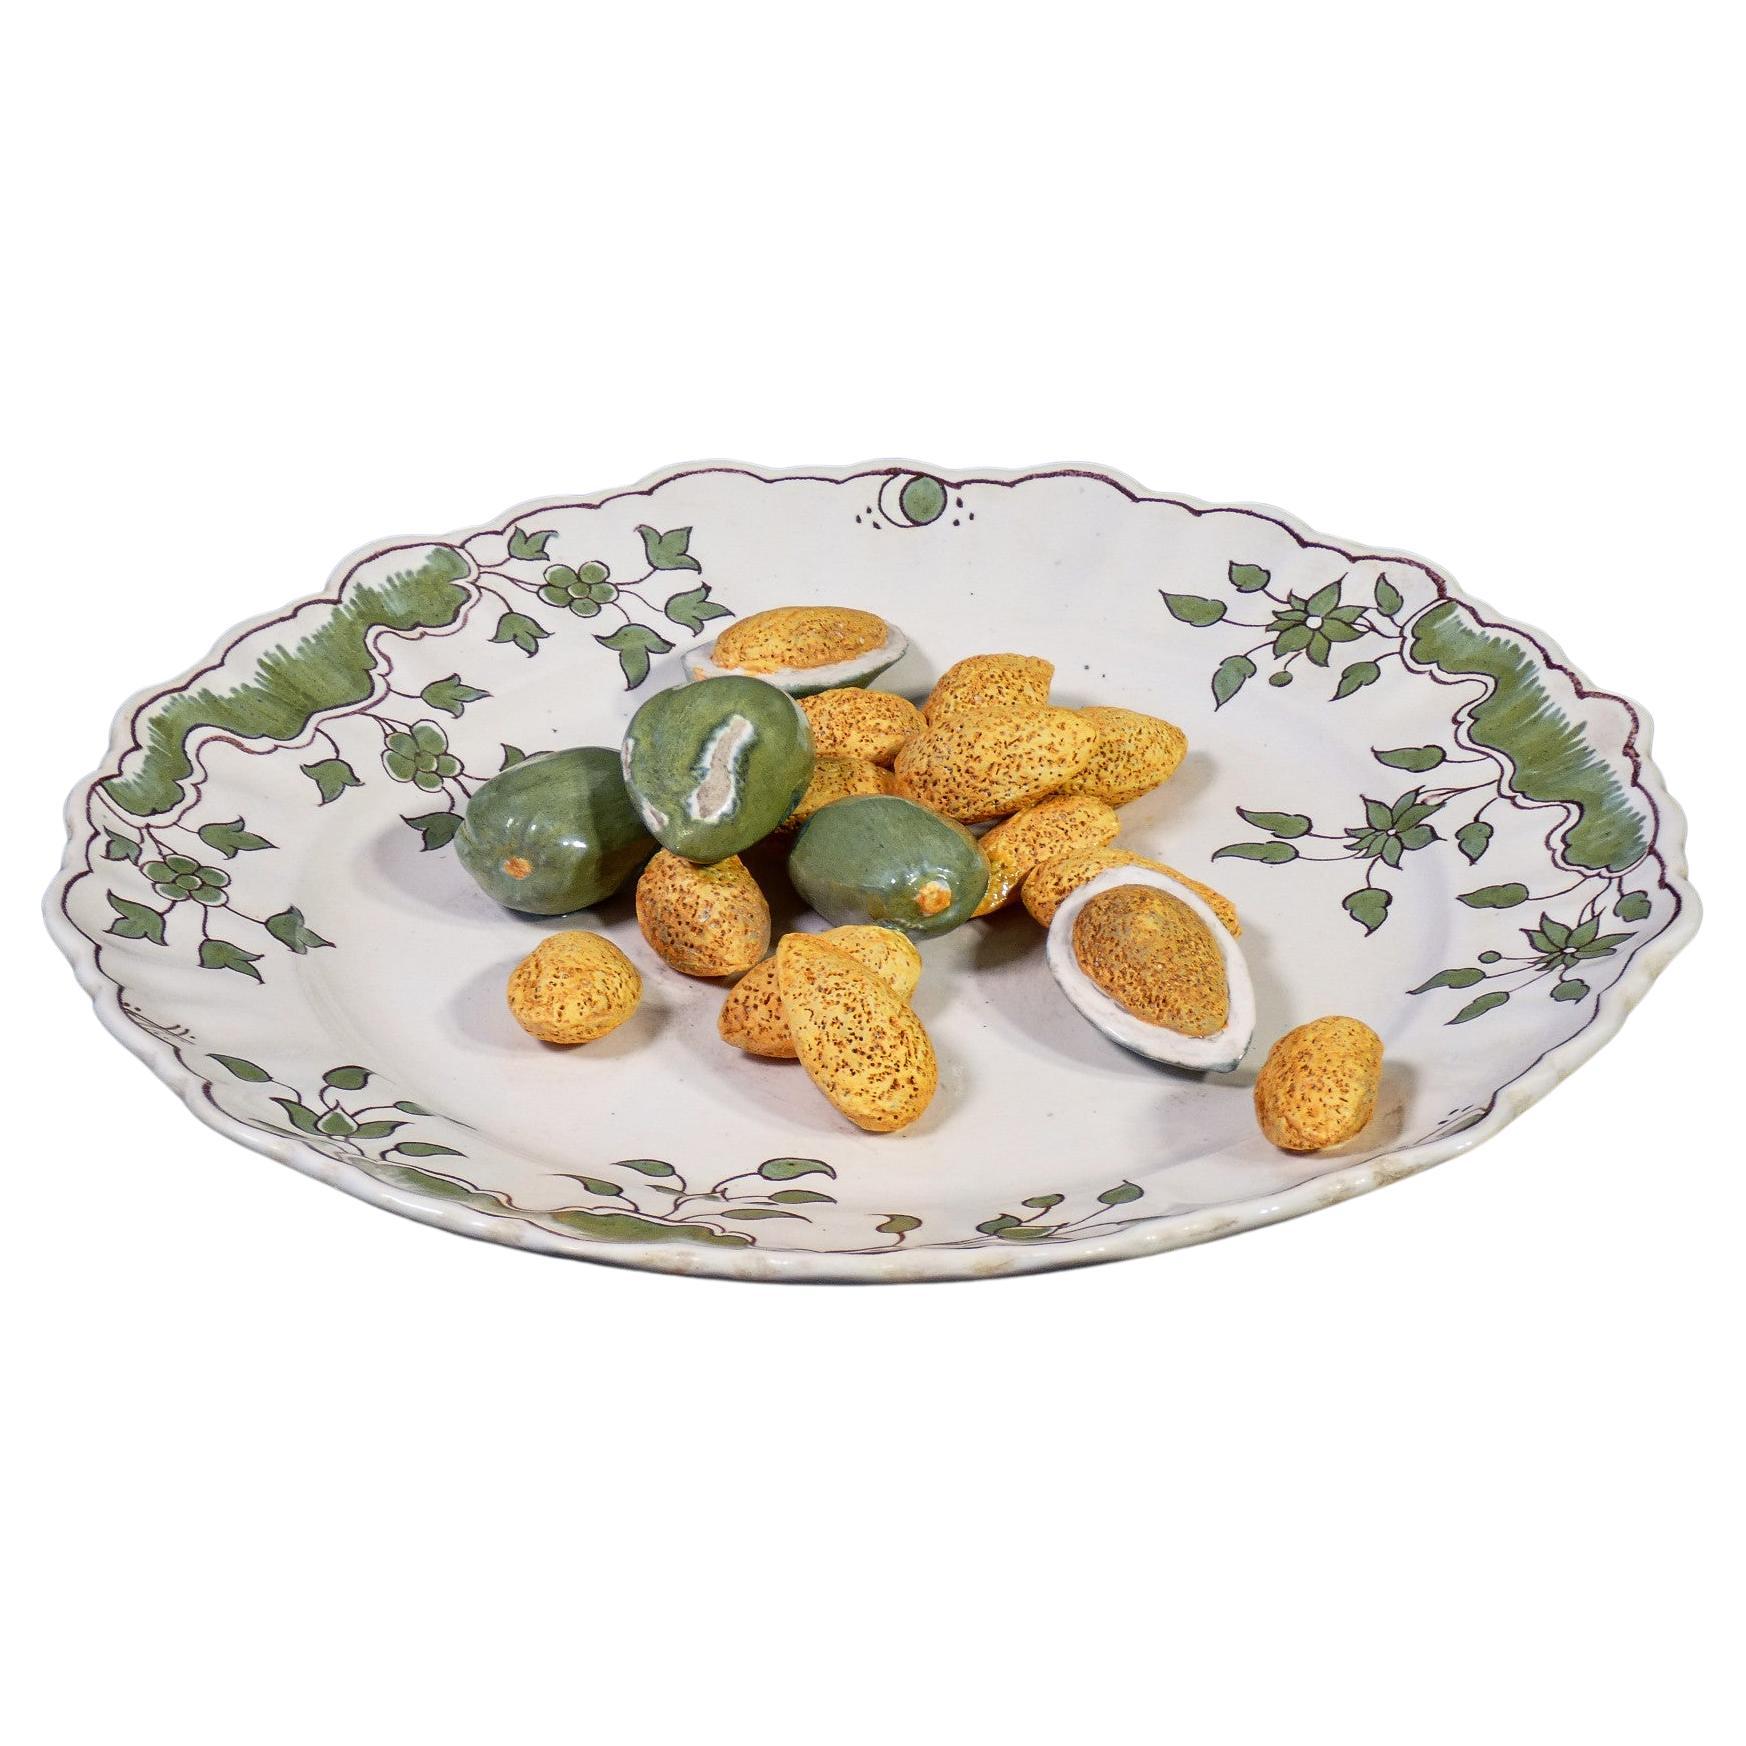 Ceramic Plate by Moustiers with Almonds Sculpture, Hand Painted, France, 1800